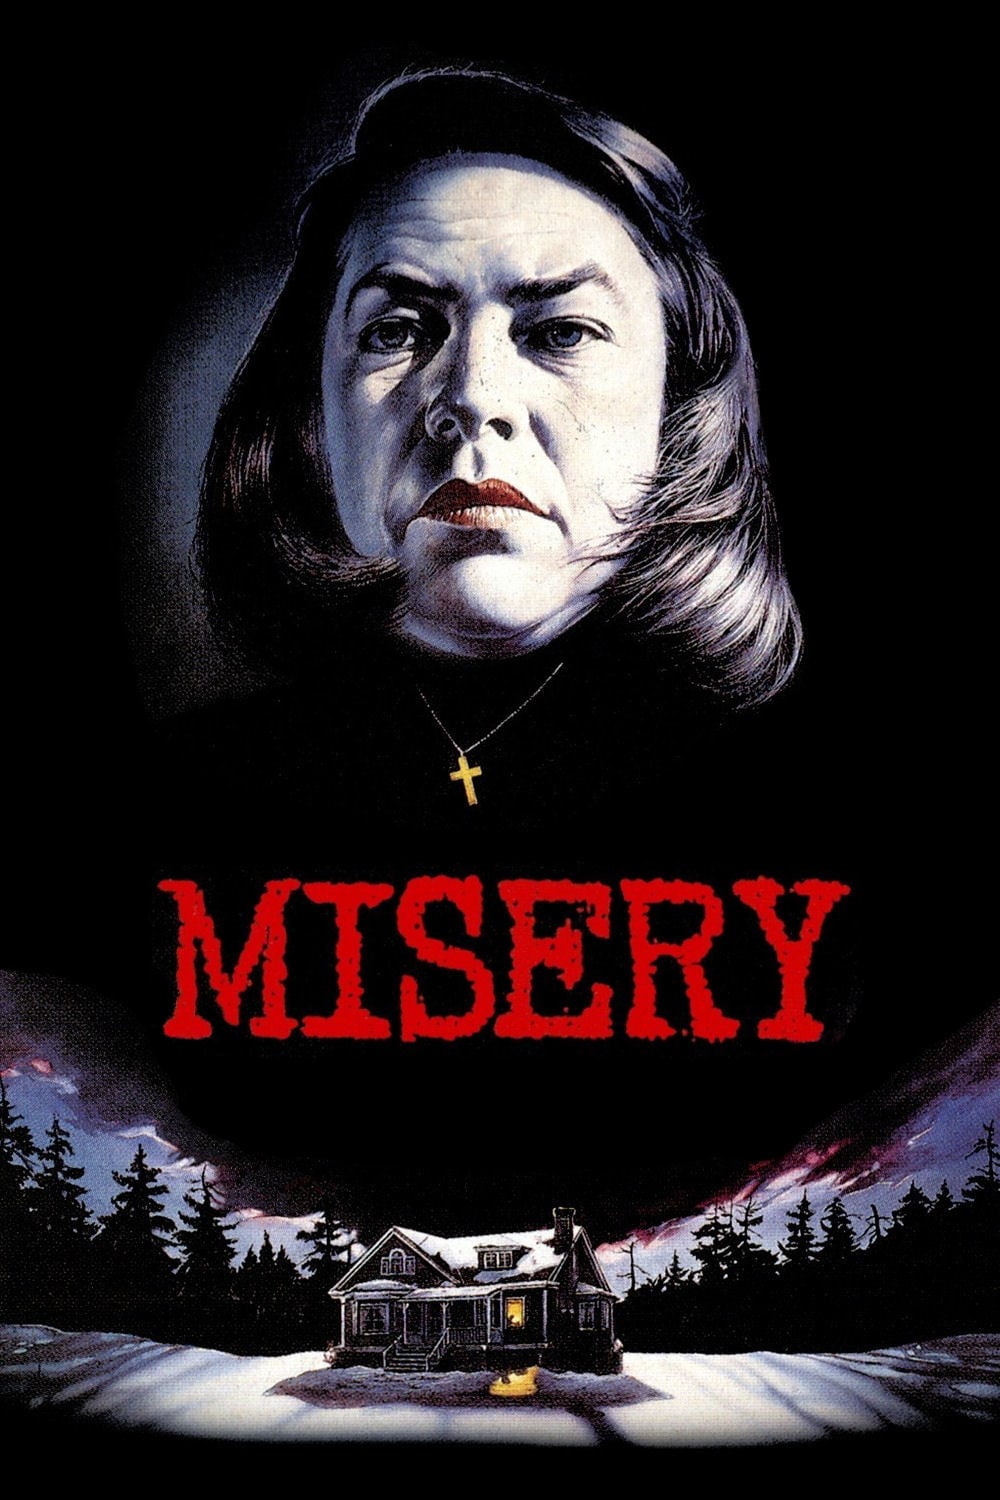 Poster for the movie "Misery"